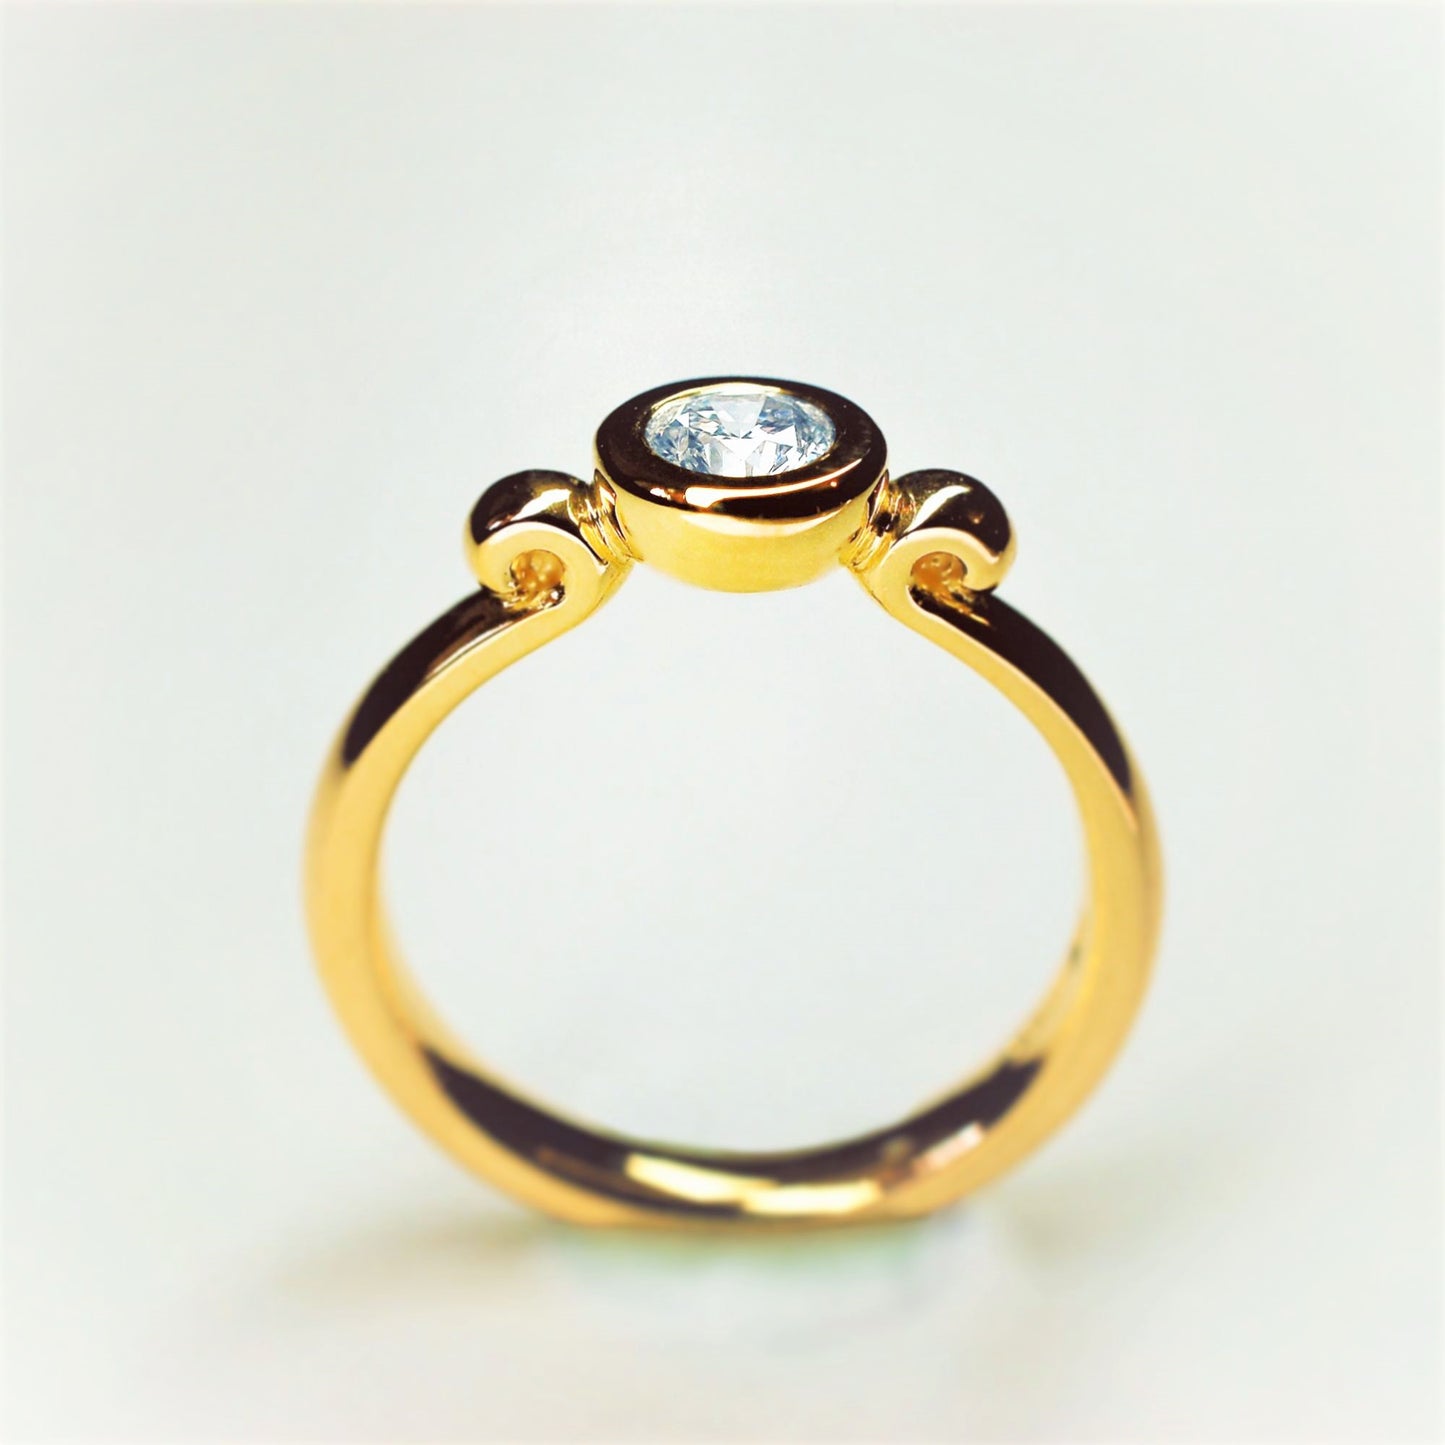 Genuine Fairtrade 18ct gold and cultured 0.25ct diamond, environmentally and ethically responsible hand Made by Adrian Ashley